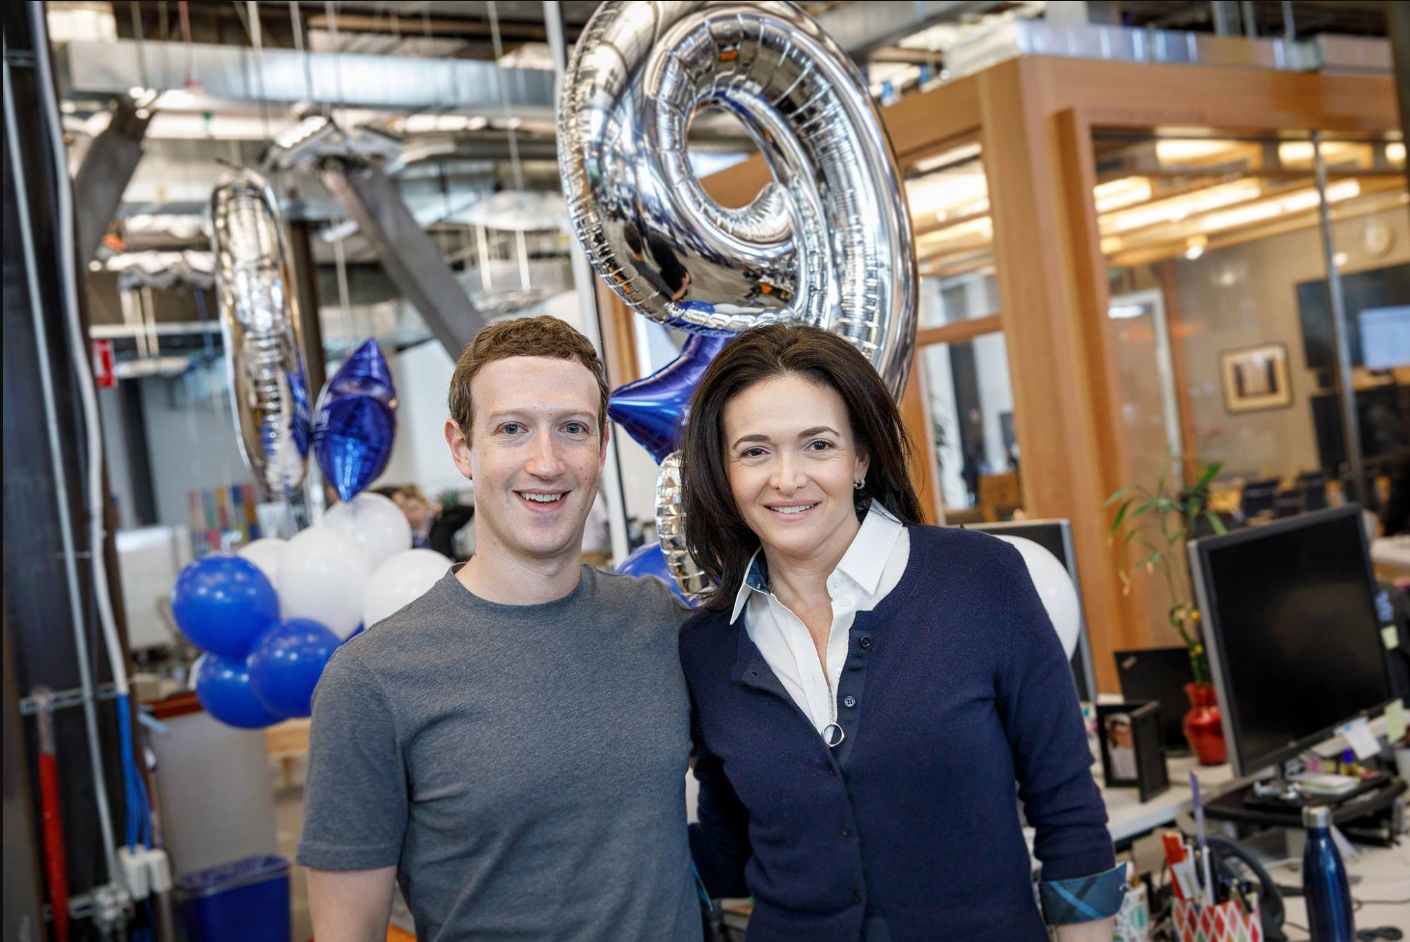 Mark Zuckerberg and Sheryl Sandberg stand in front of silver and blue balloons.